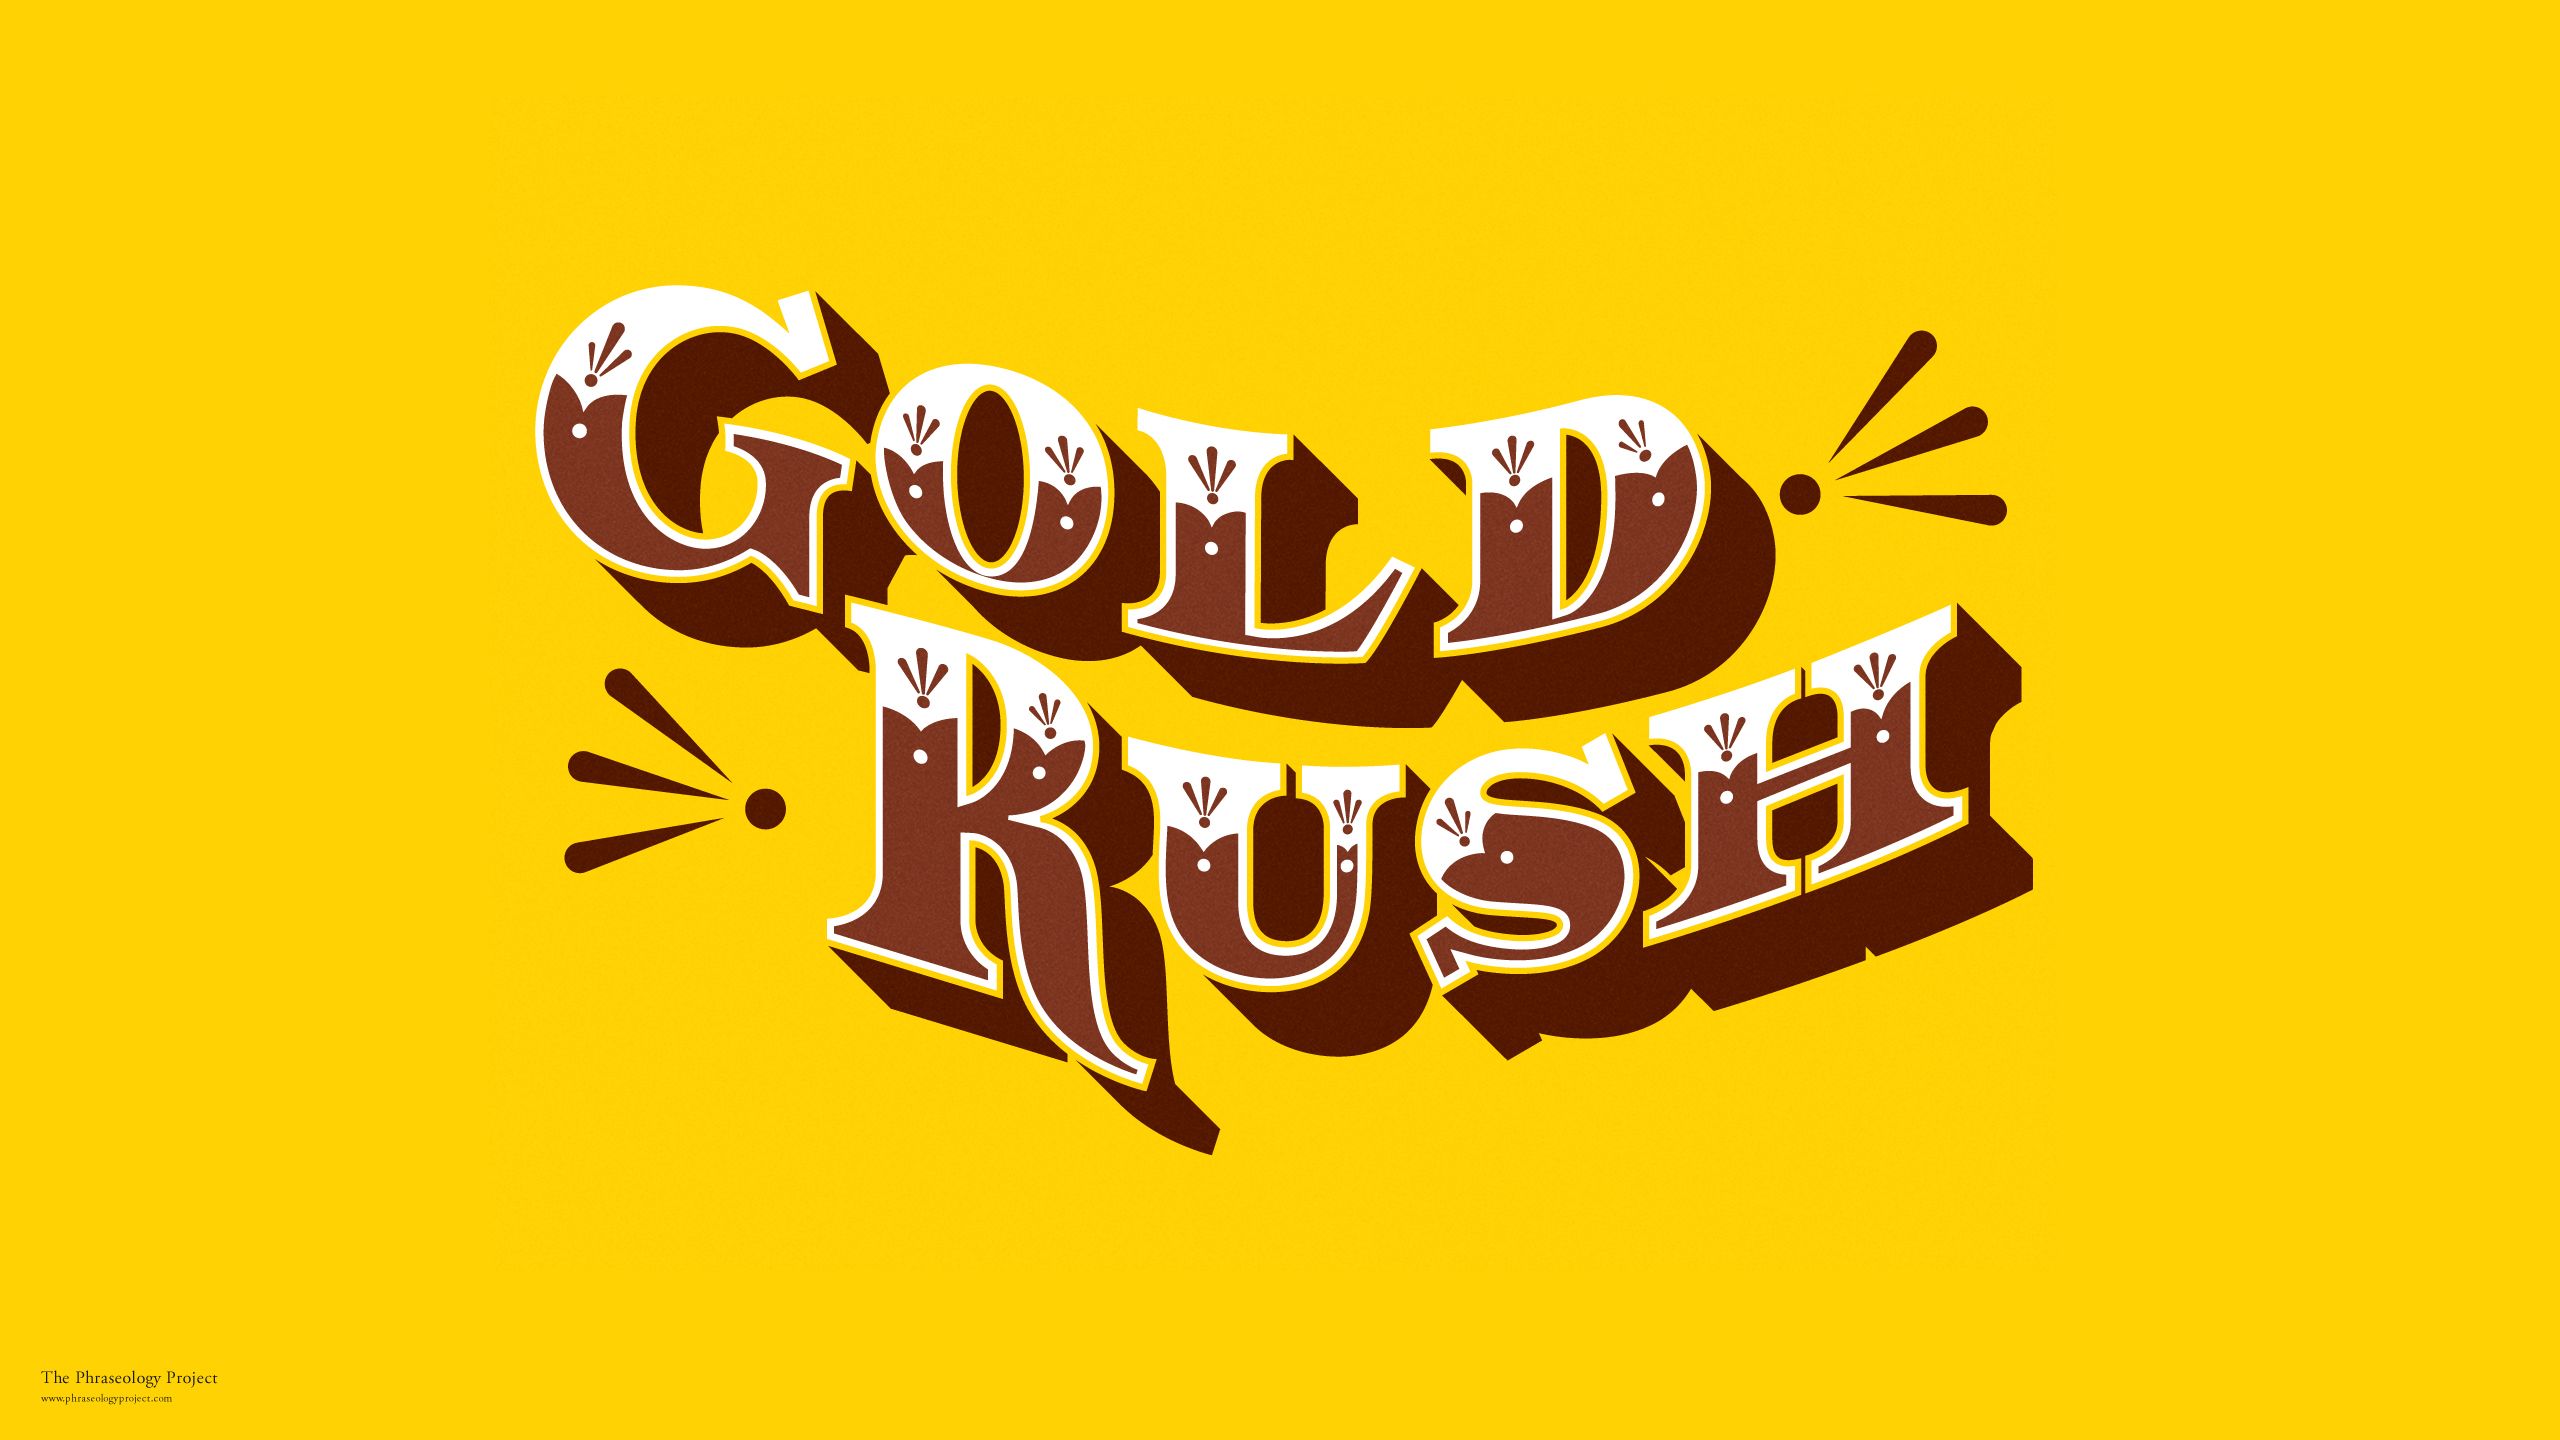 Free download Download Gold Rush Wallpaper Gallery [2560x1440]